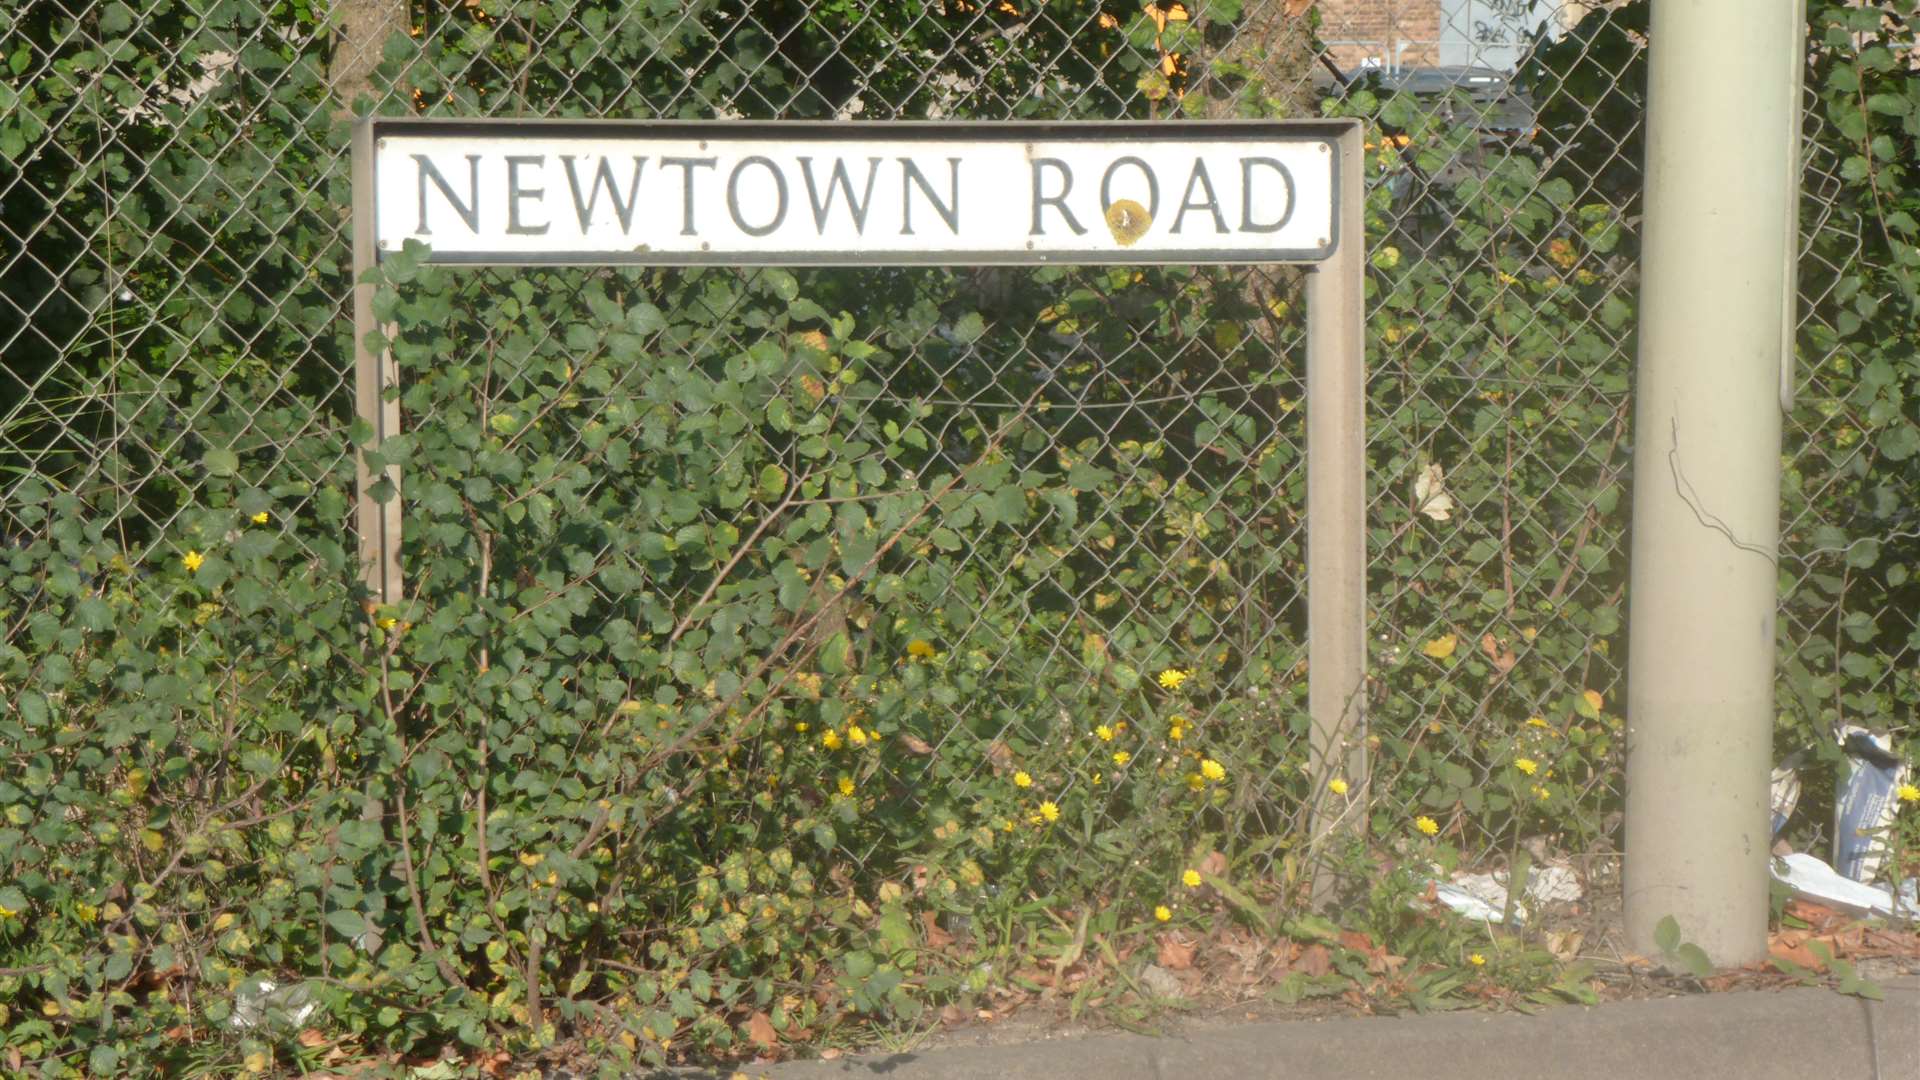 Police closed Newtown Road after the crash